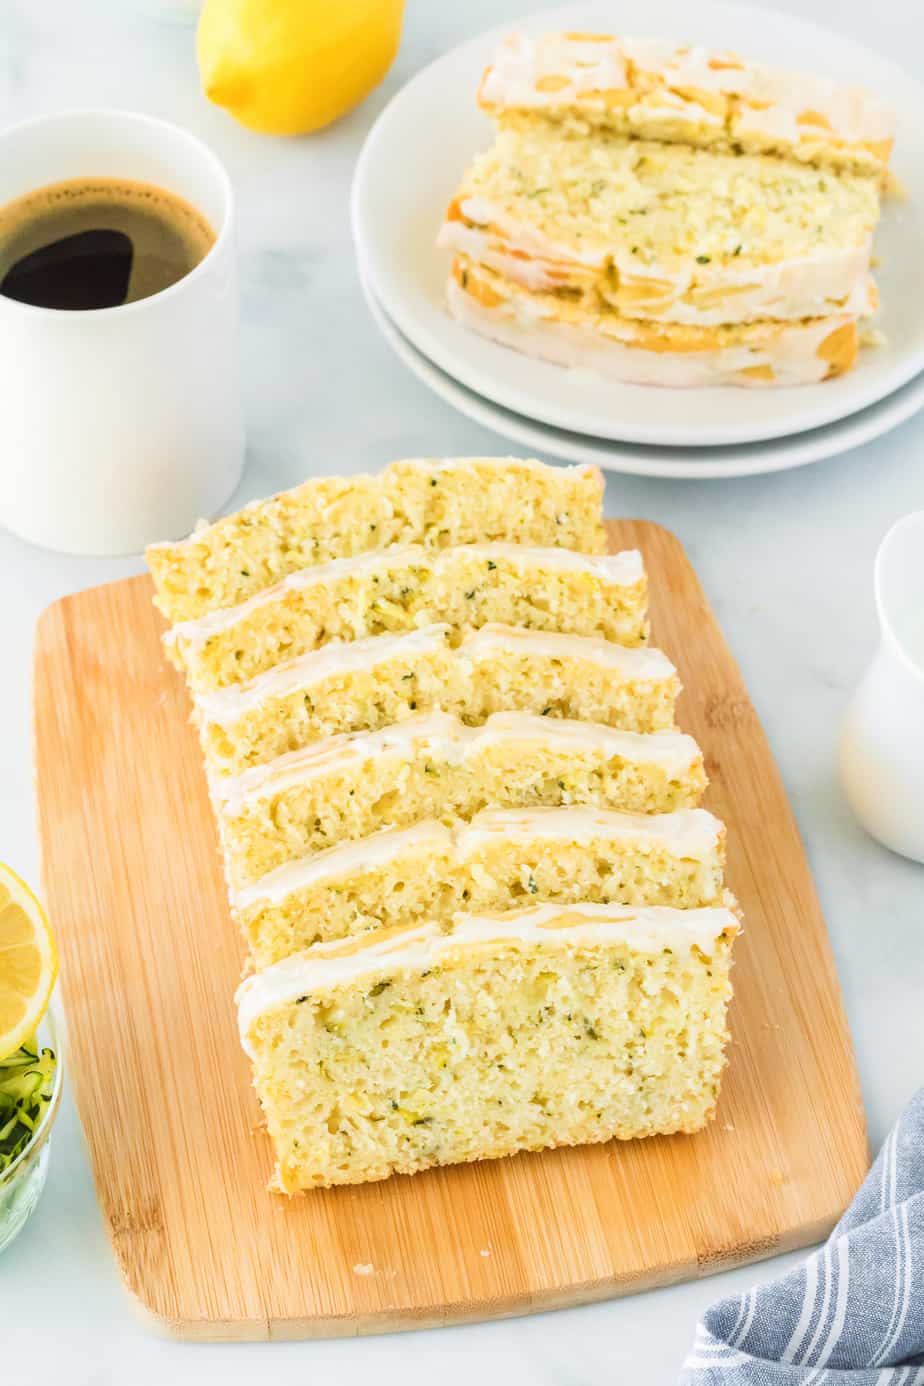 Lemon zucchini cake loaf sliced on a platter with more slices on a plate behind the platter with a cup of coffee nearby